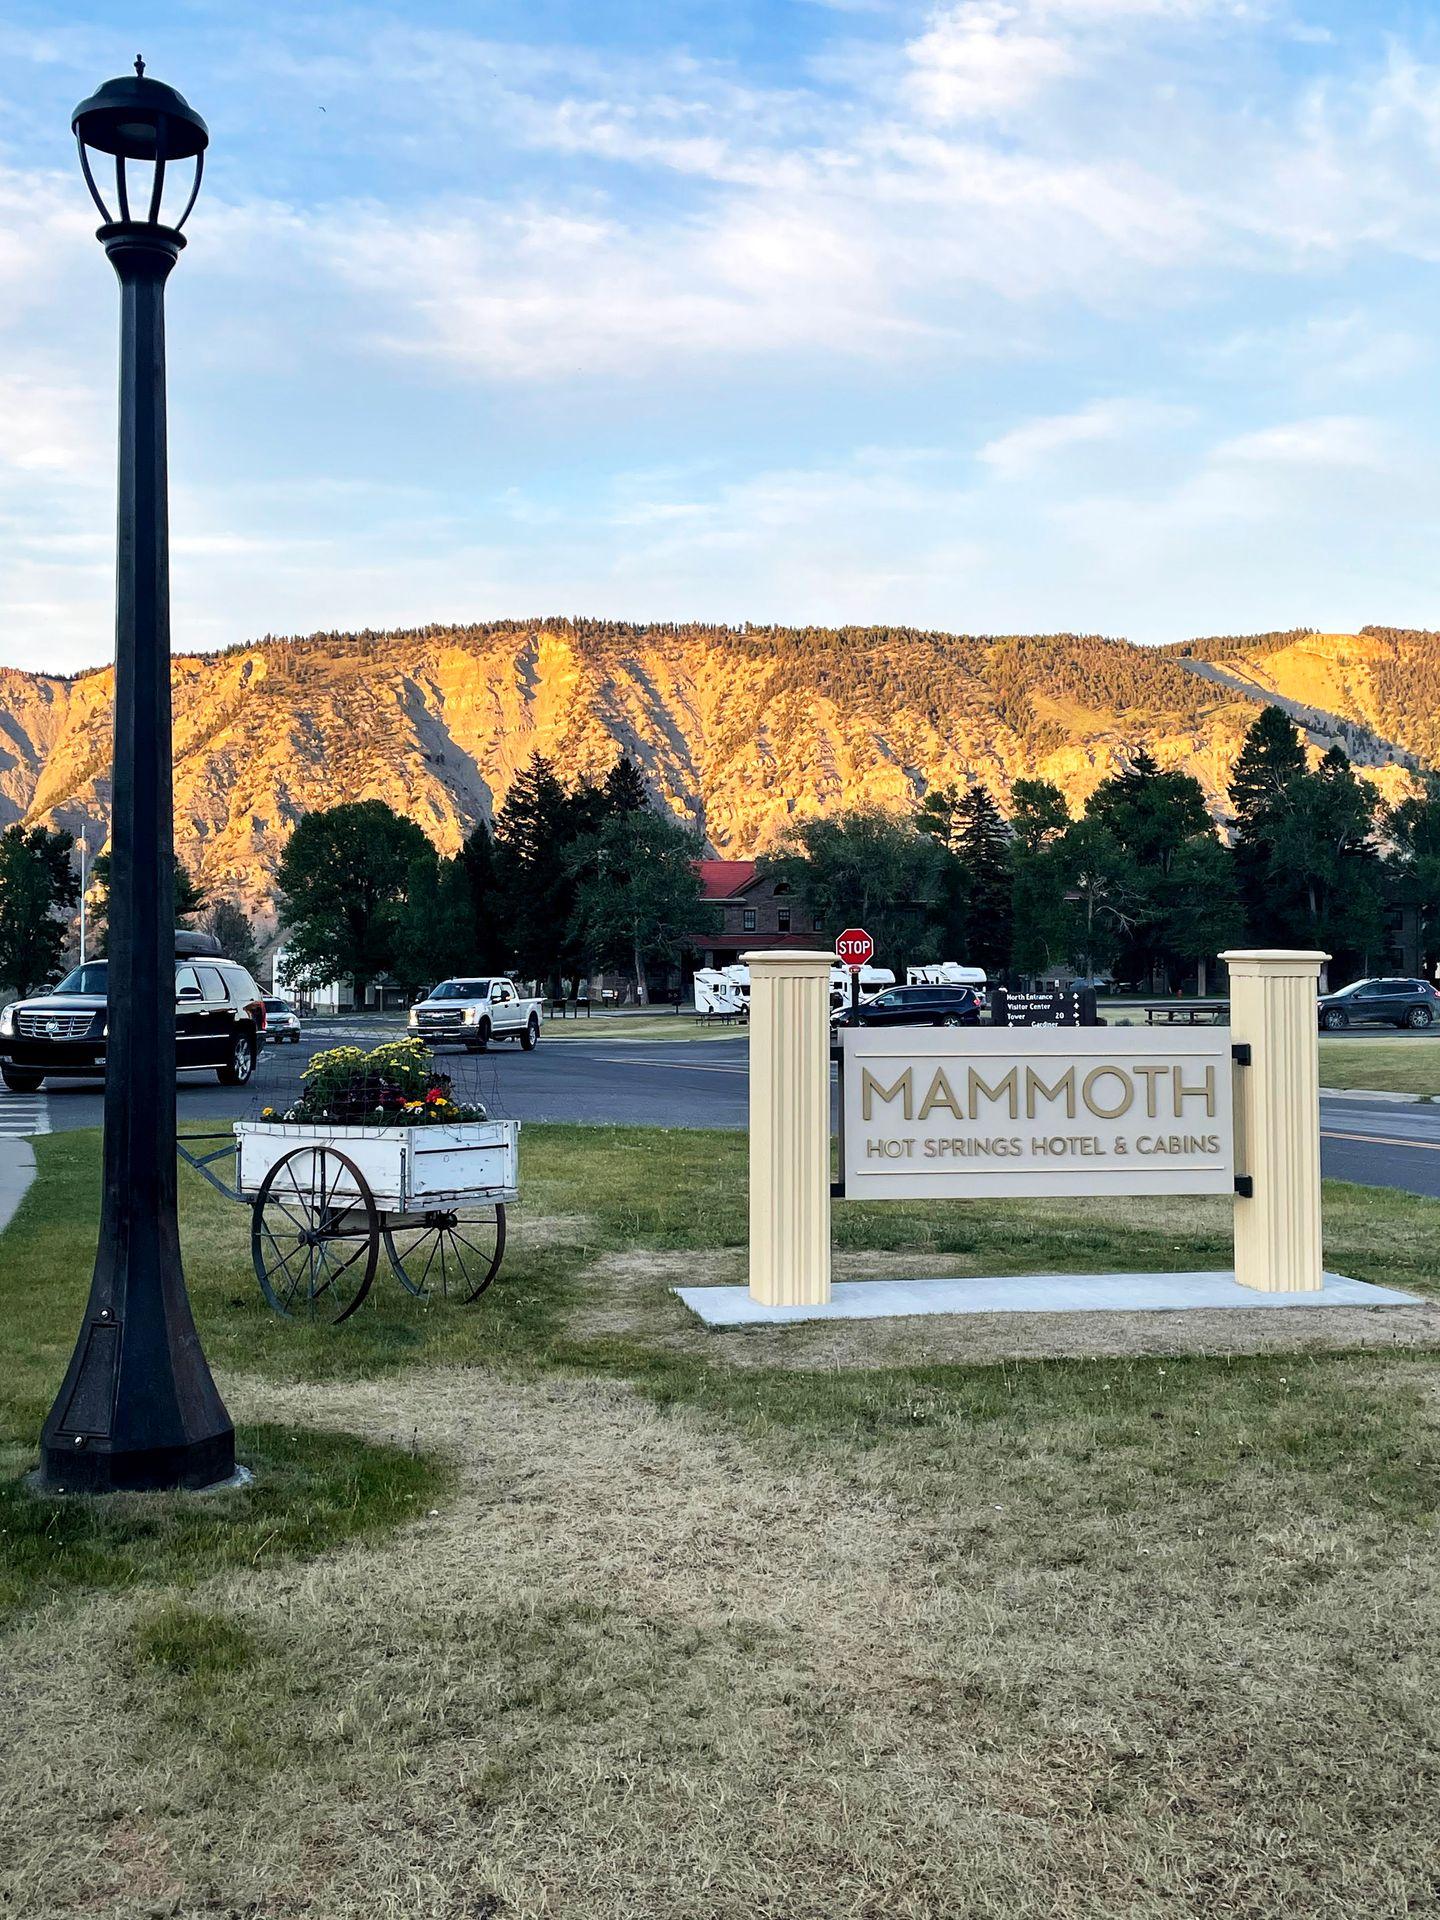 The sign outside of the Mammoth Hot Springs Hotel.